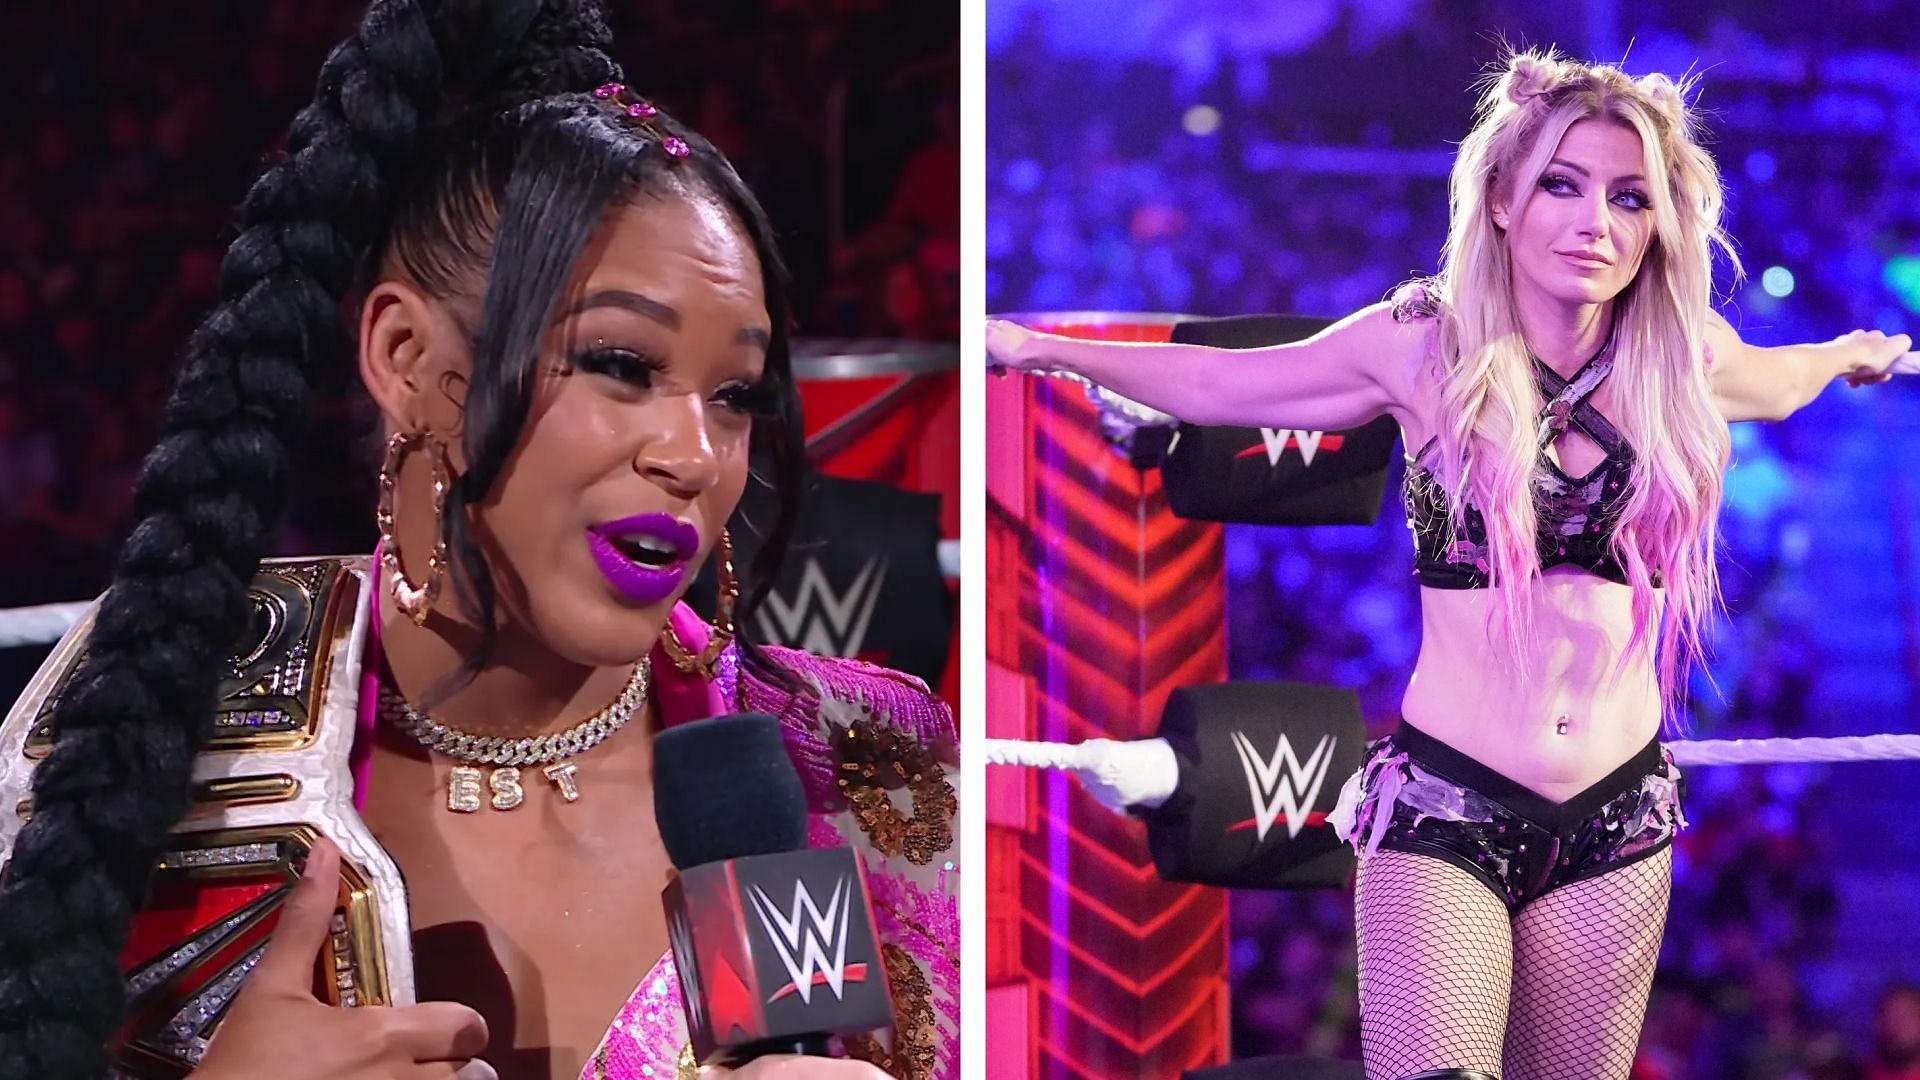 Bianca Belair has many potential challengers in WWE